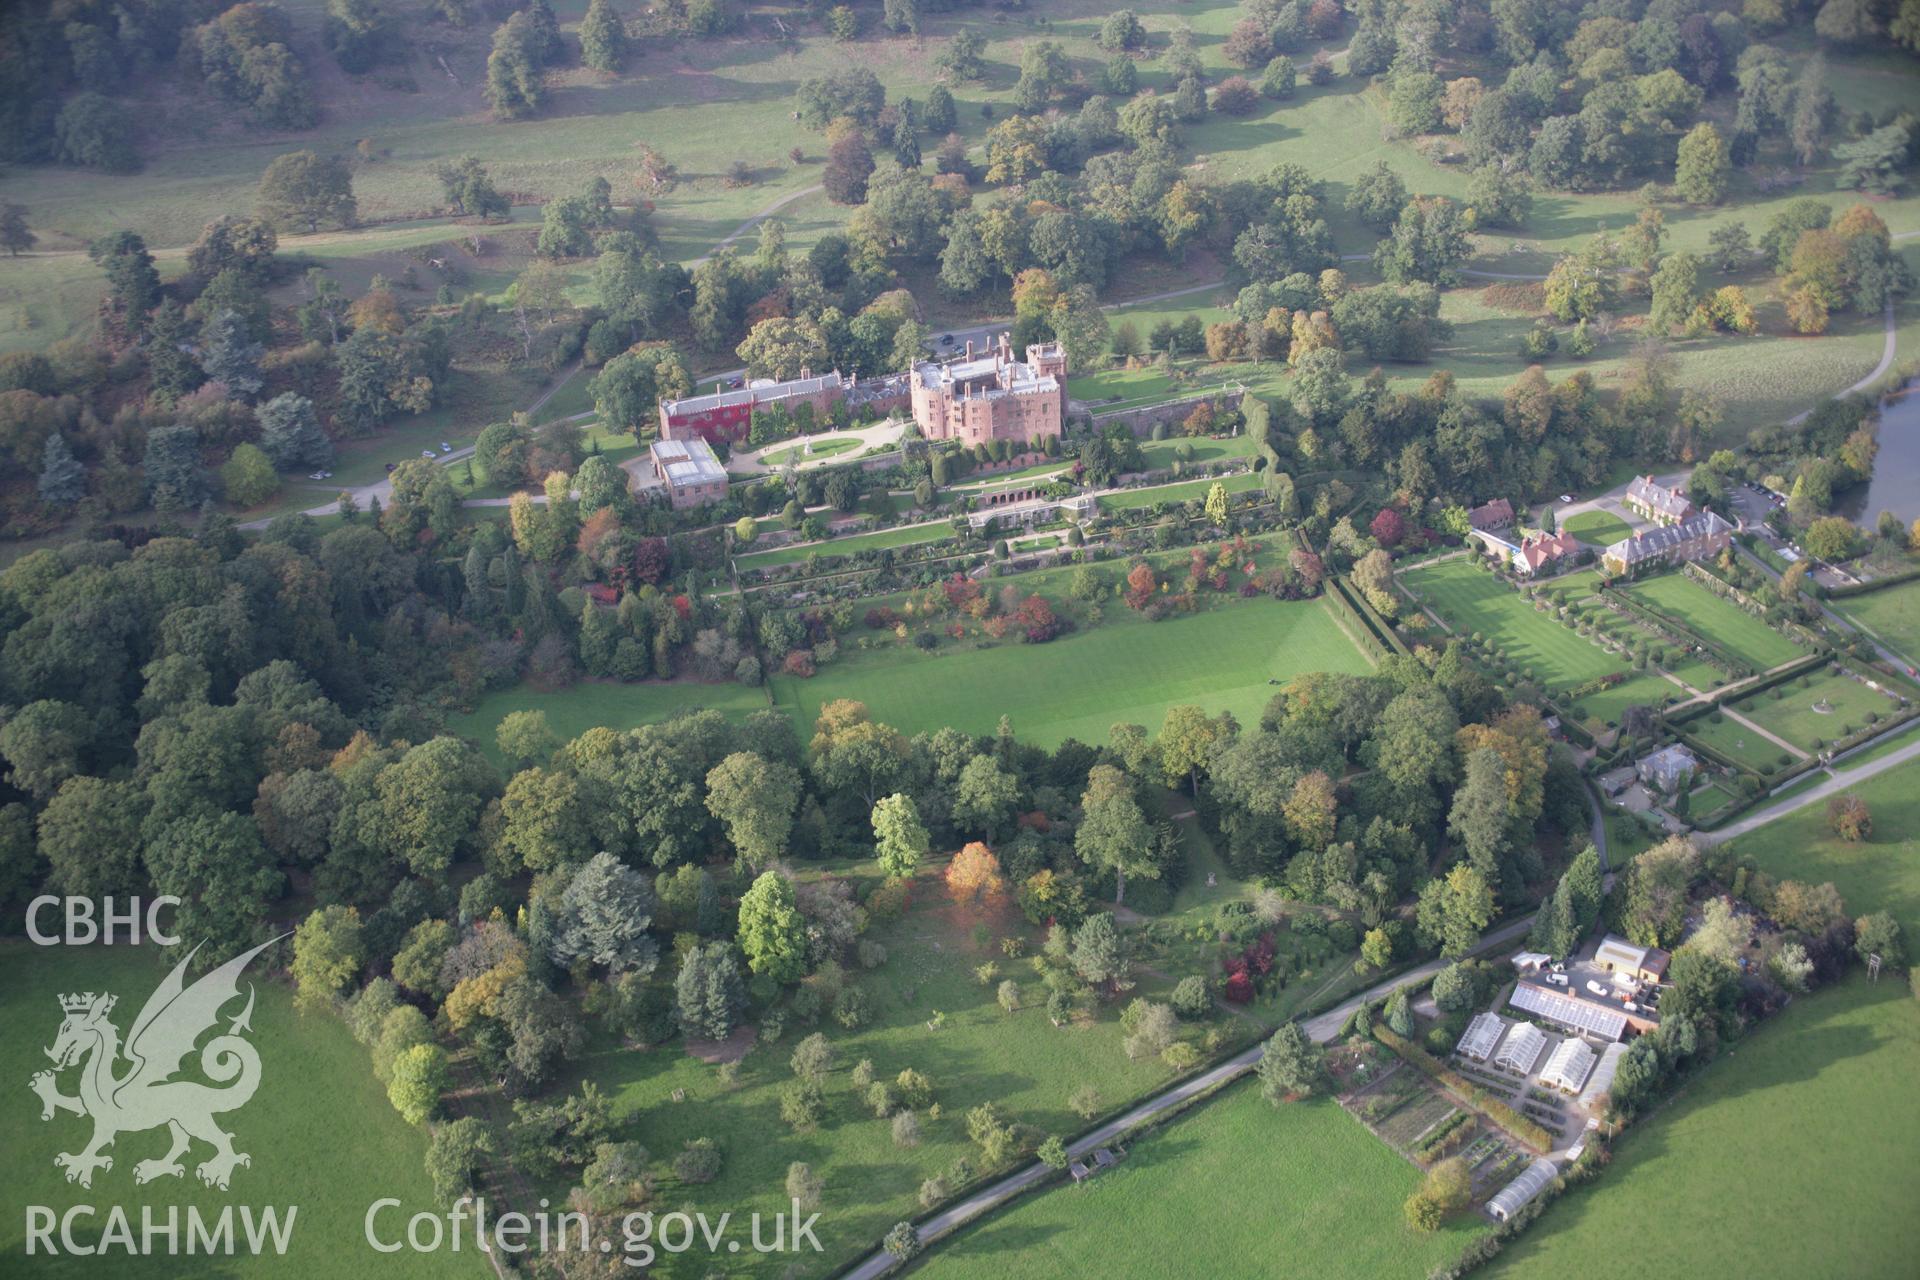 RCAHMW colour oblique aerial photograph of Powis Castle, also showing the gardens in autumn colour, from the south-east. Taken on 17 October 2005 by Toby Driver